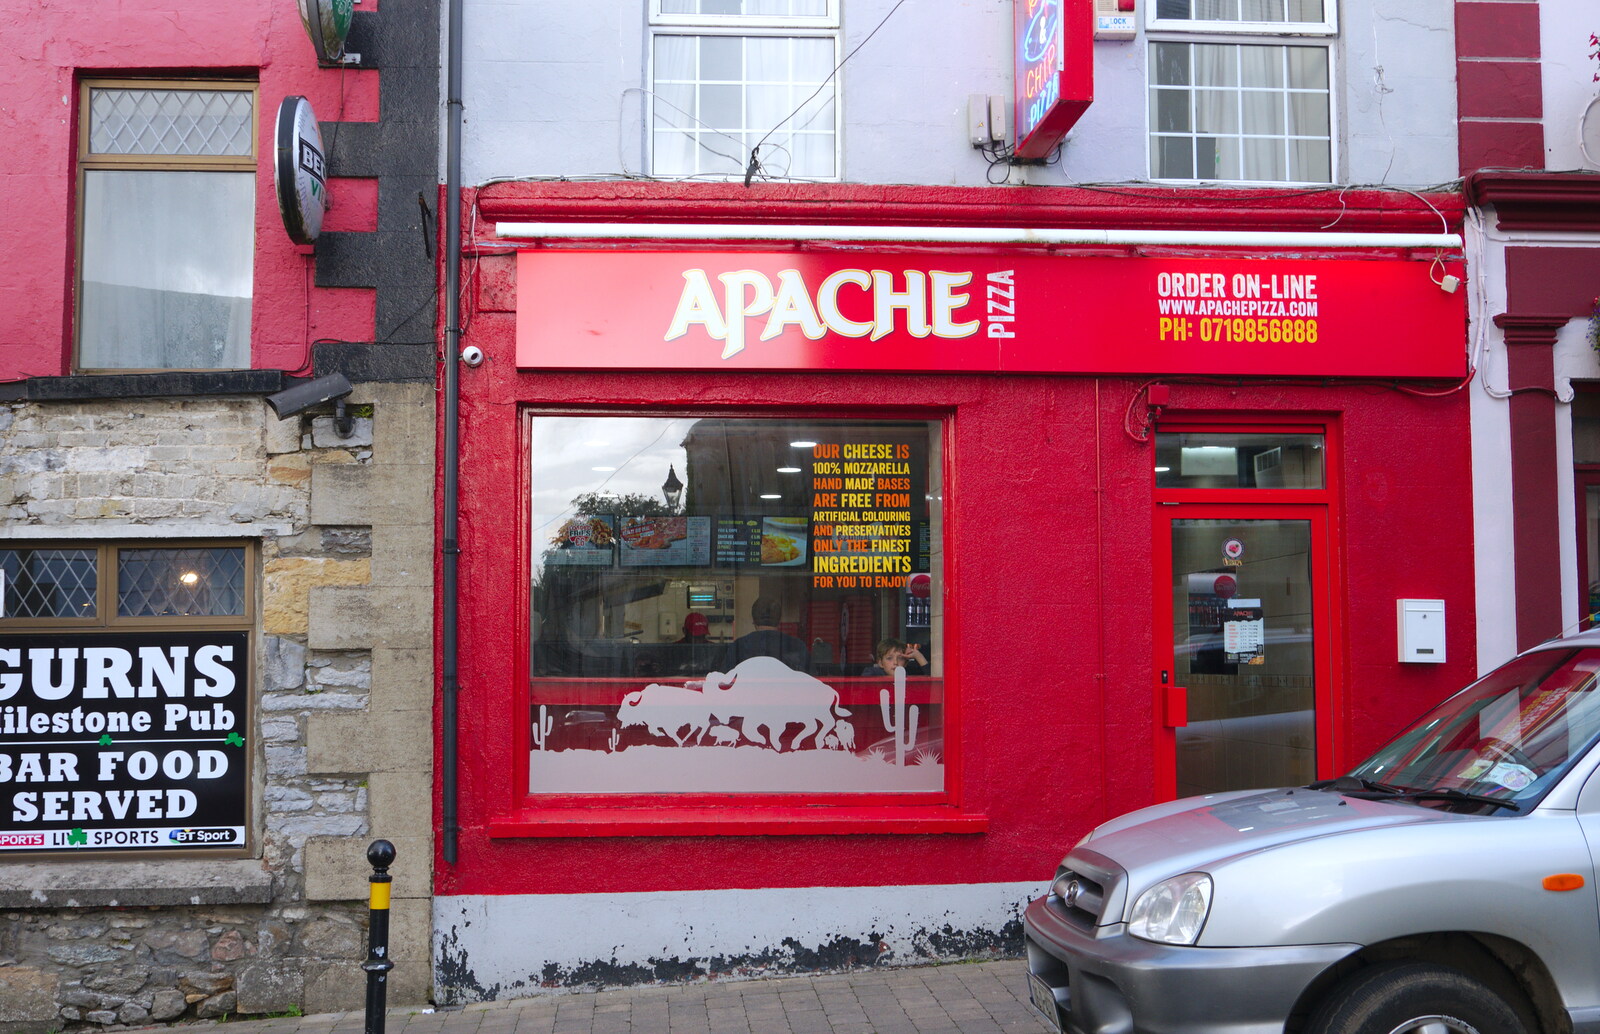 Apache Pizza in Manorhamilton from Florence Court and a Postcard from Sligo, Fermanagh and Sligo, Ireland - 21st August 2019